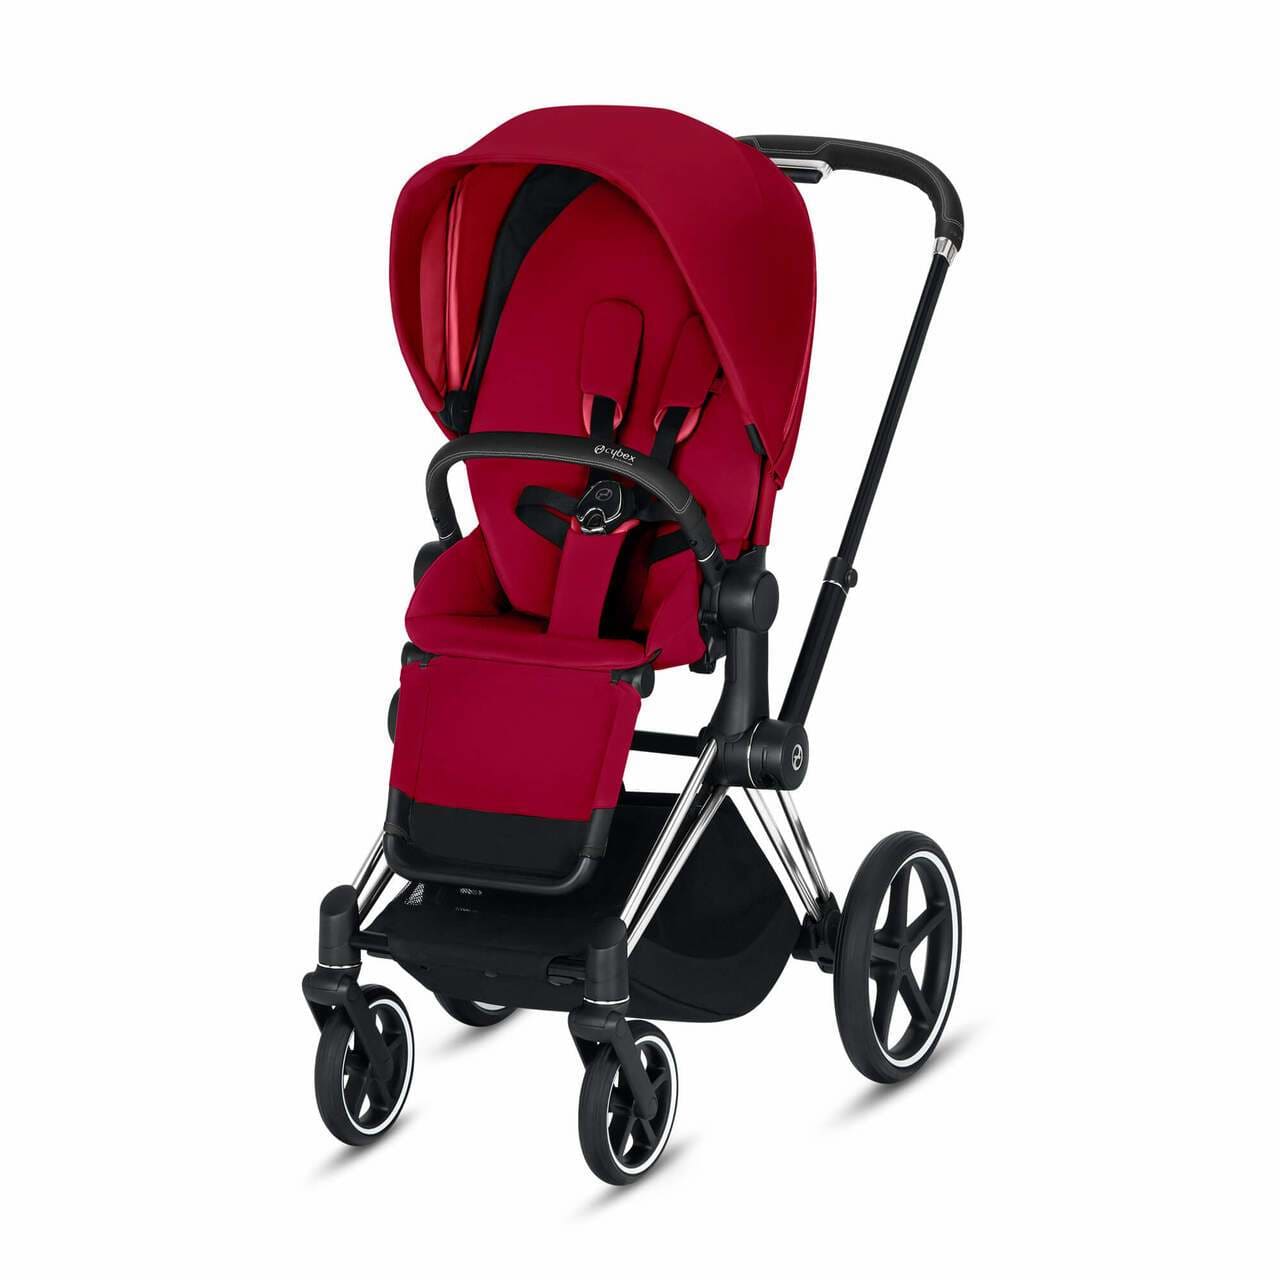 CYBEX ePriam 3-in-1 Travel System Chrome with Black Details Baby Stroller – True Red 519003543 4058511706511
